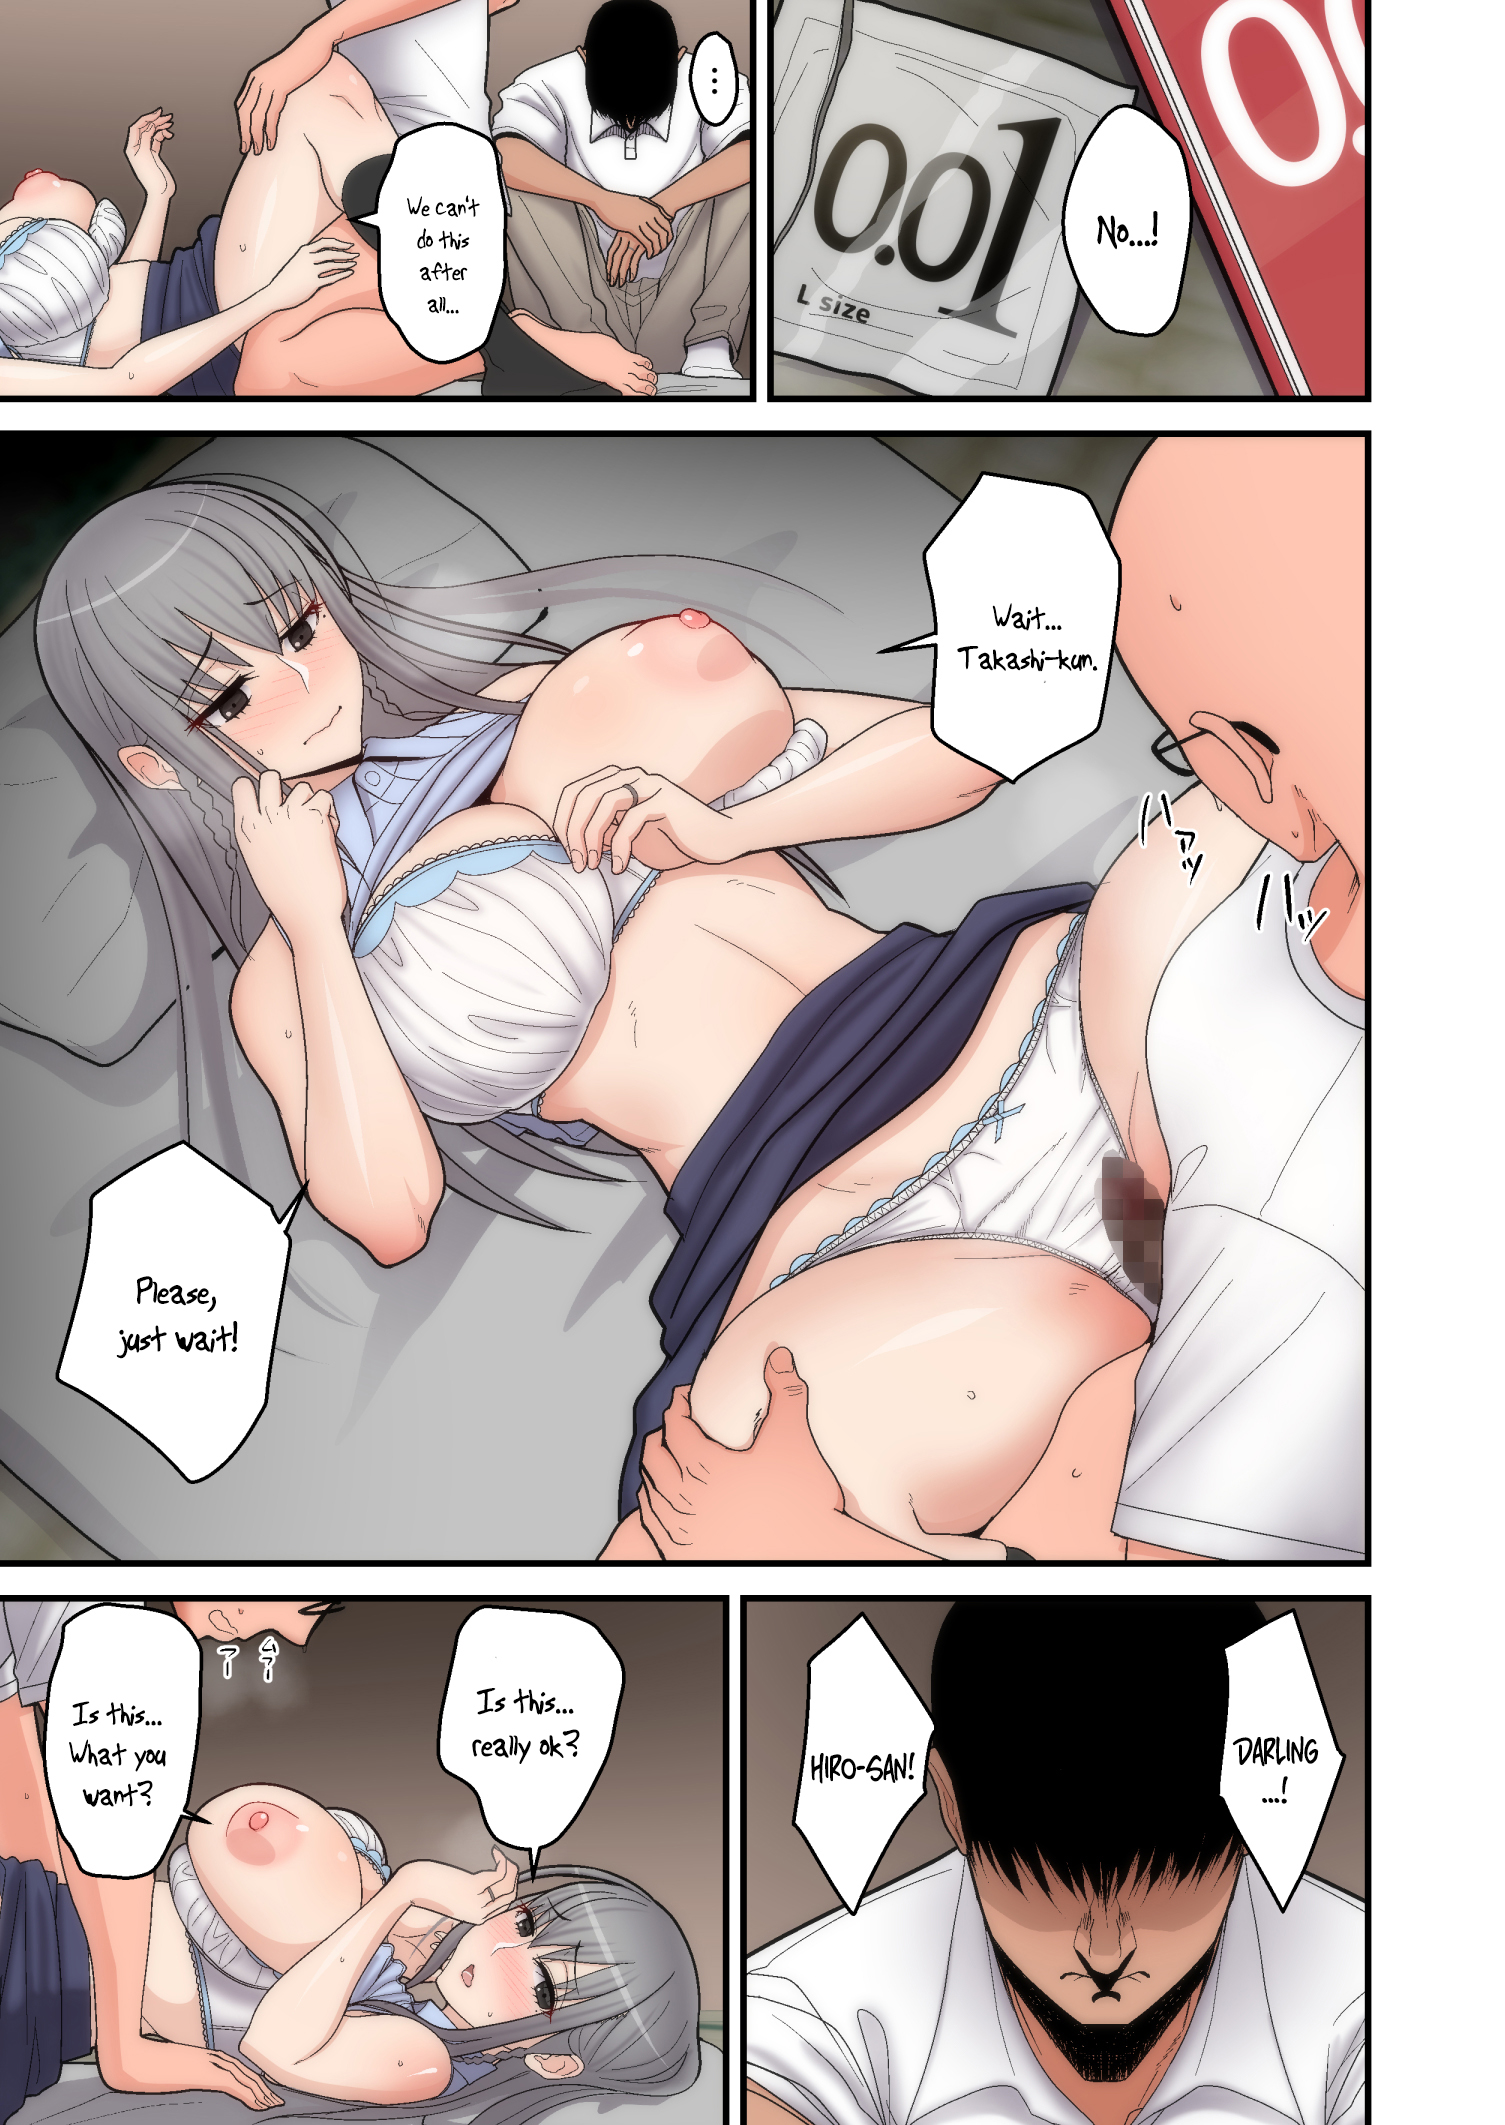 Husband must watch cheating wife fuck or shell die - hentai comics pic